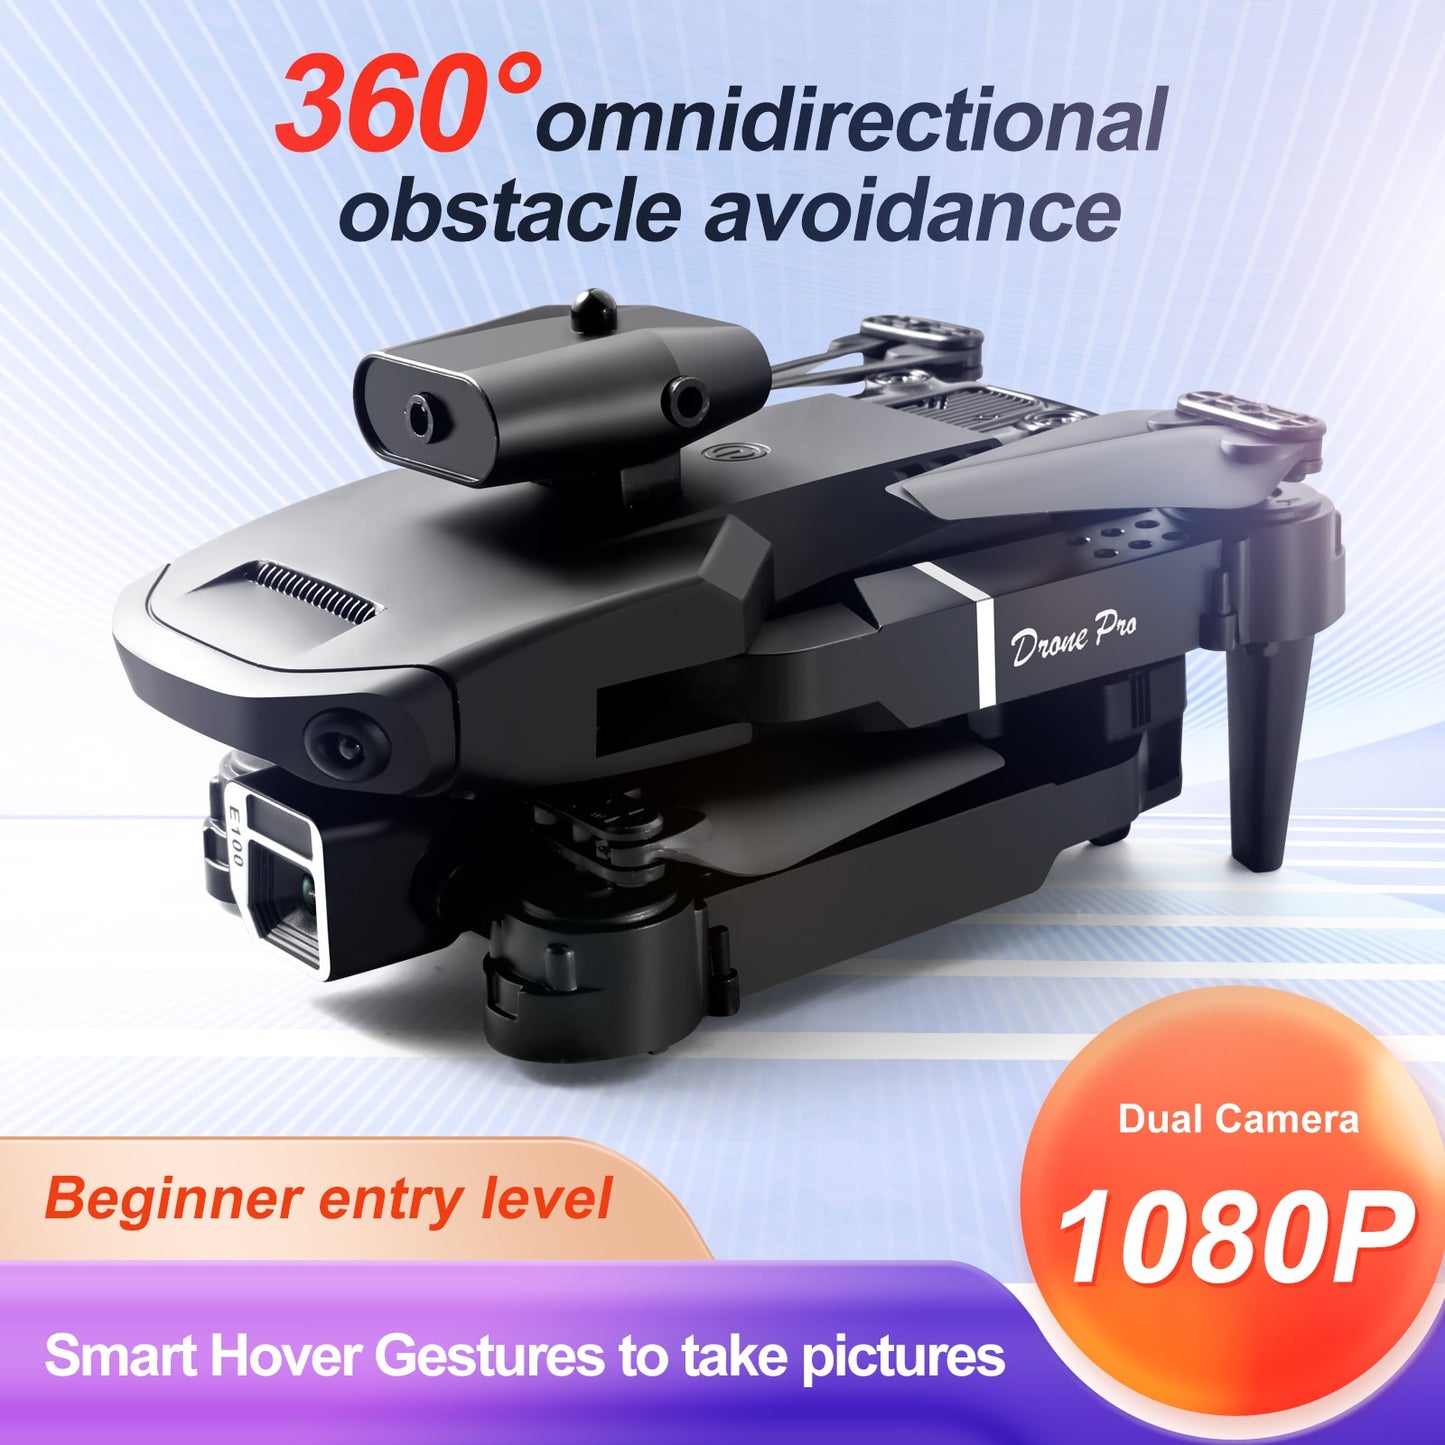 New E100 Four-sided Obstacle Avoidance Drone Folding Hd 4k Aerial